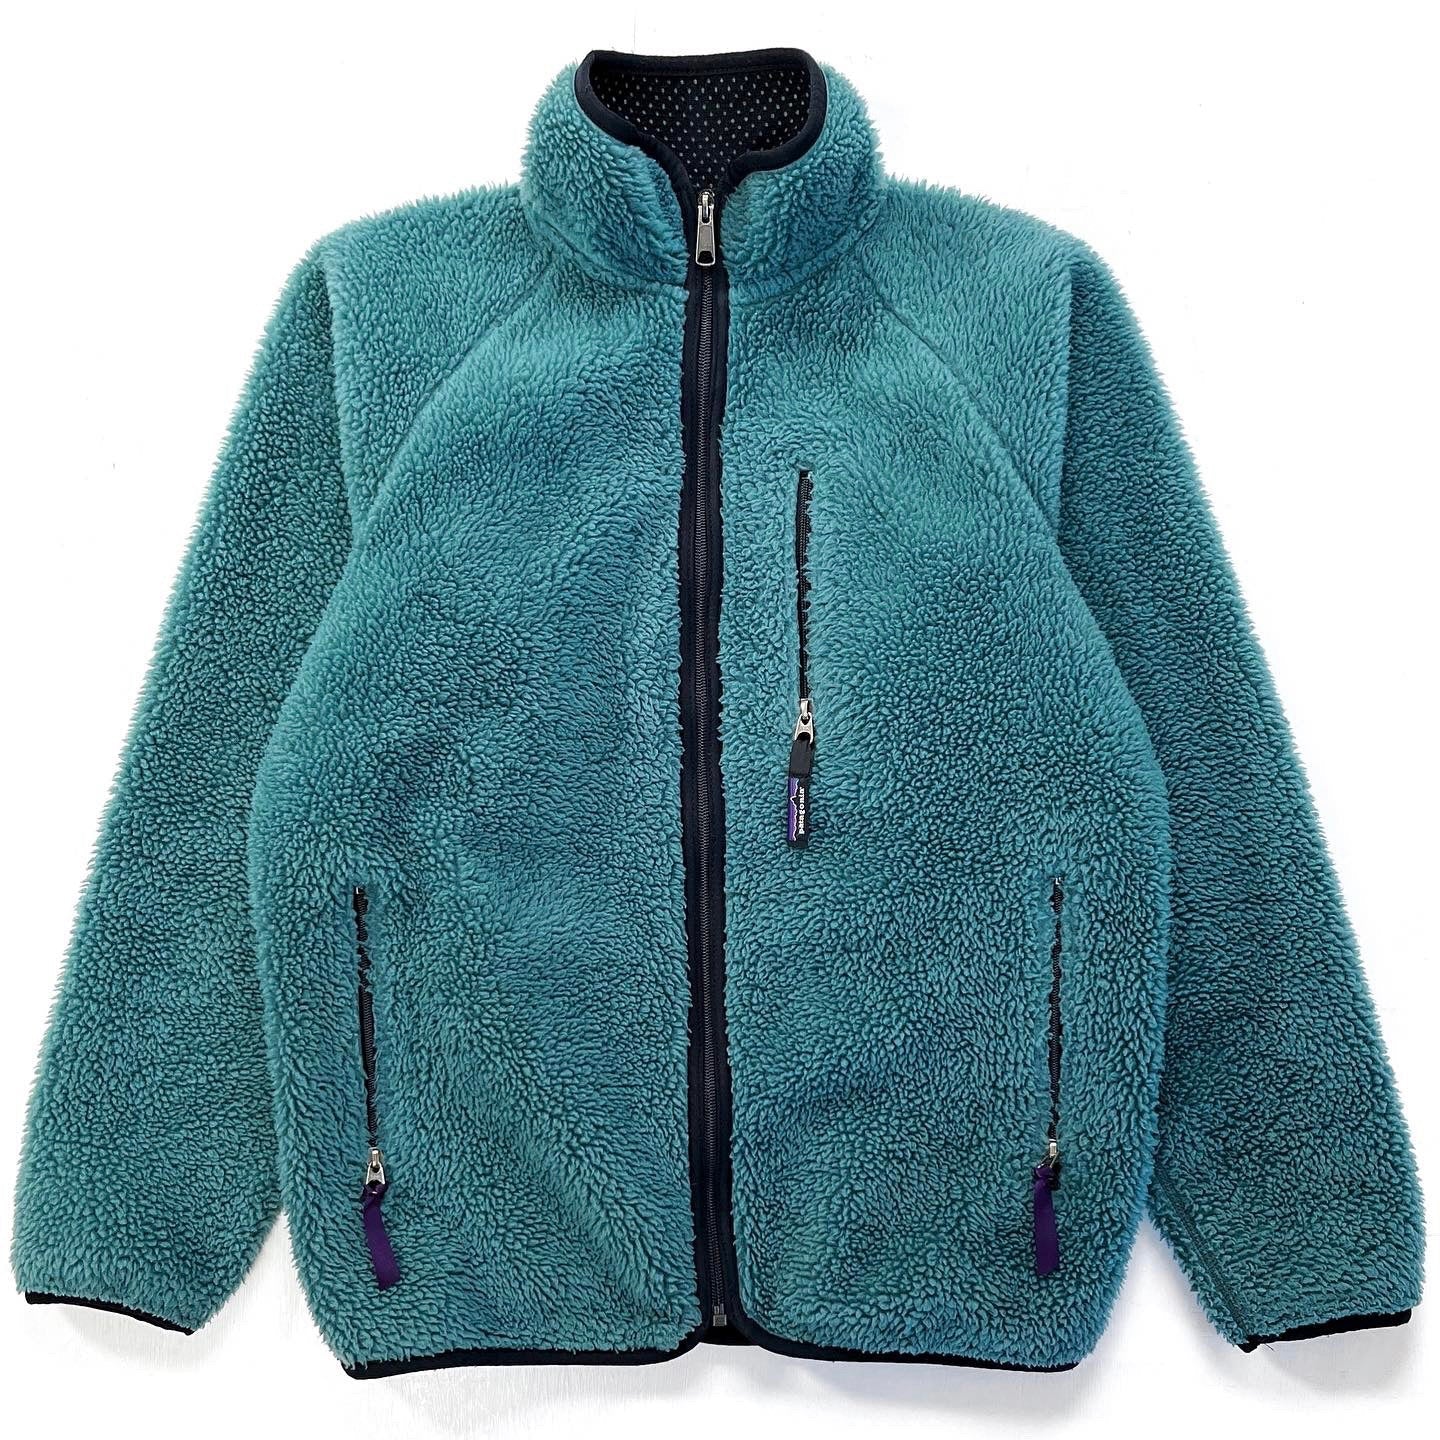 1996 Patagonia Made In The U.S.A. Retro Pile Cardigan, Fir Green (M)